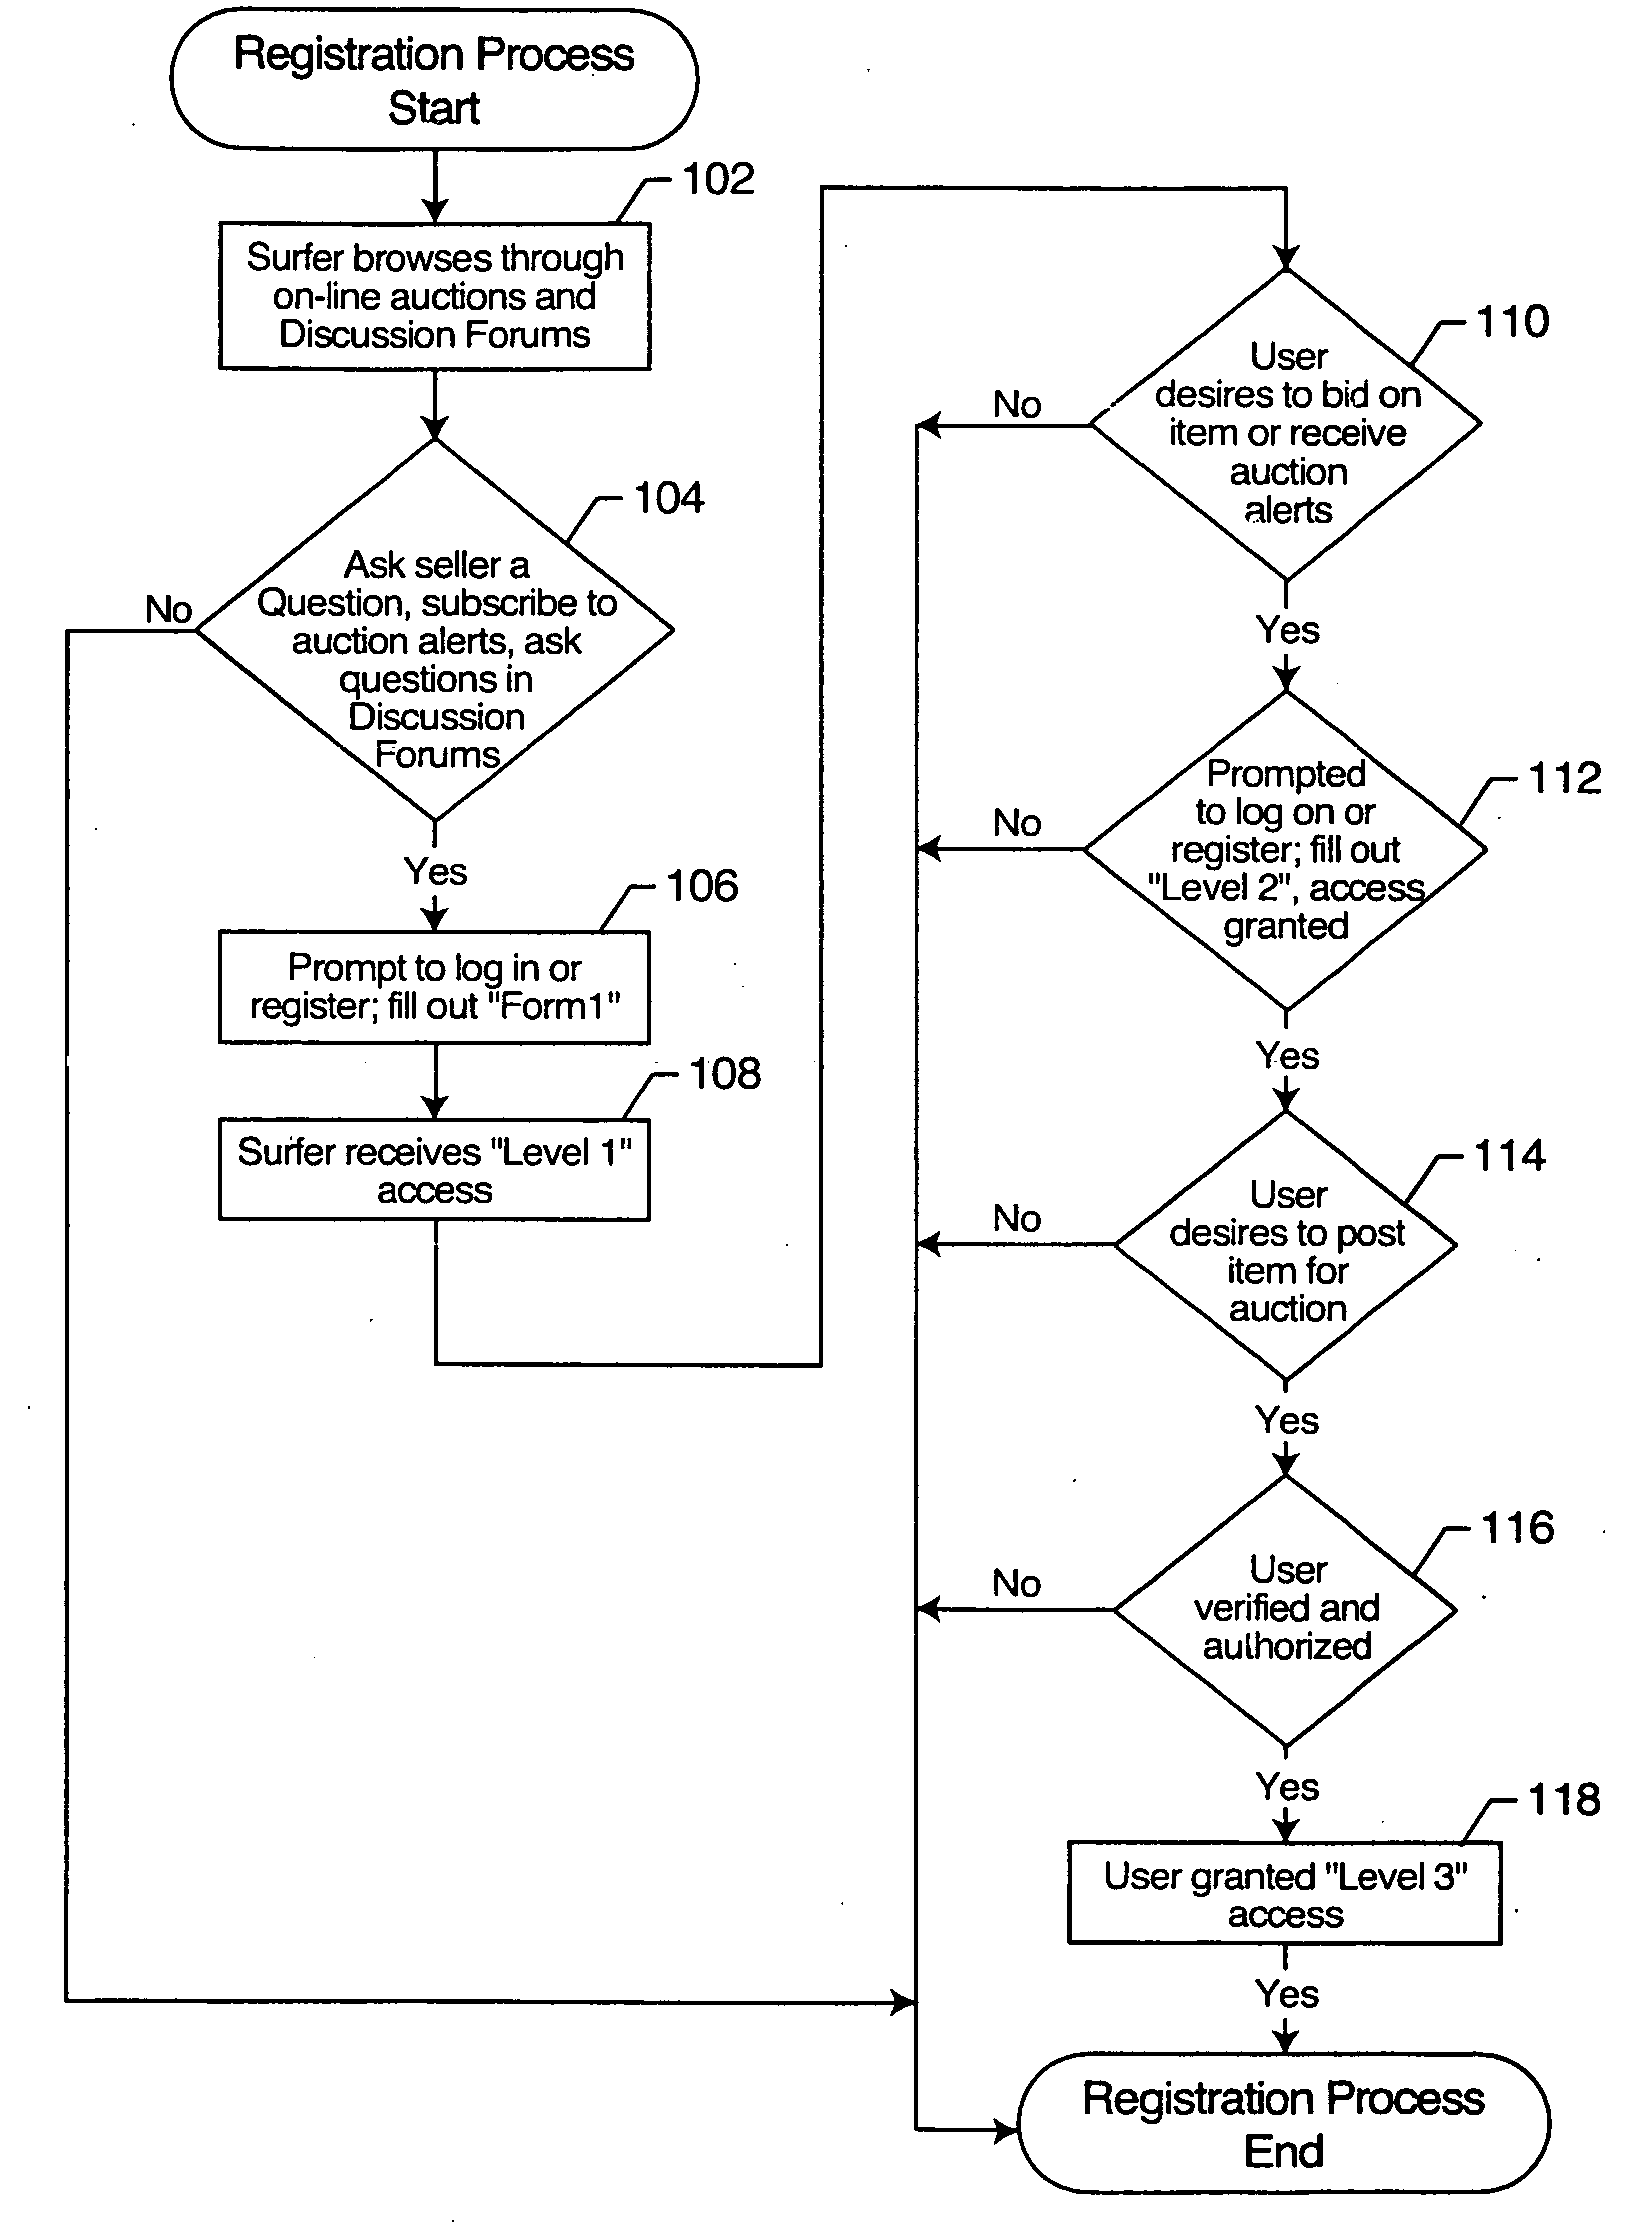 Method for conducting an on-line forum for auctioning intangible assets